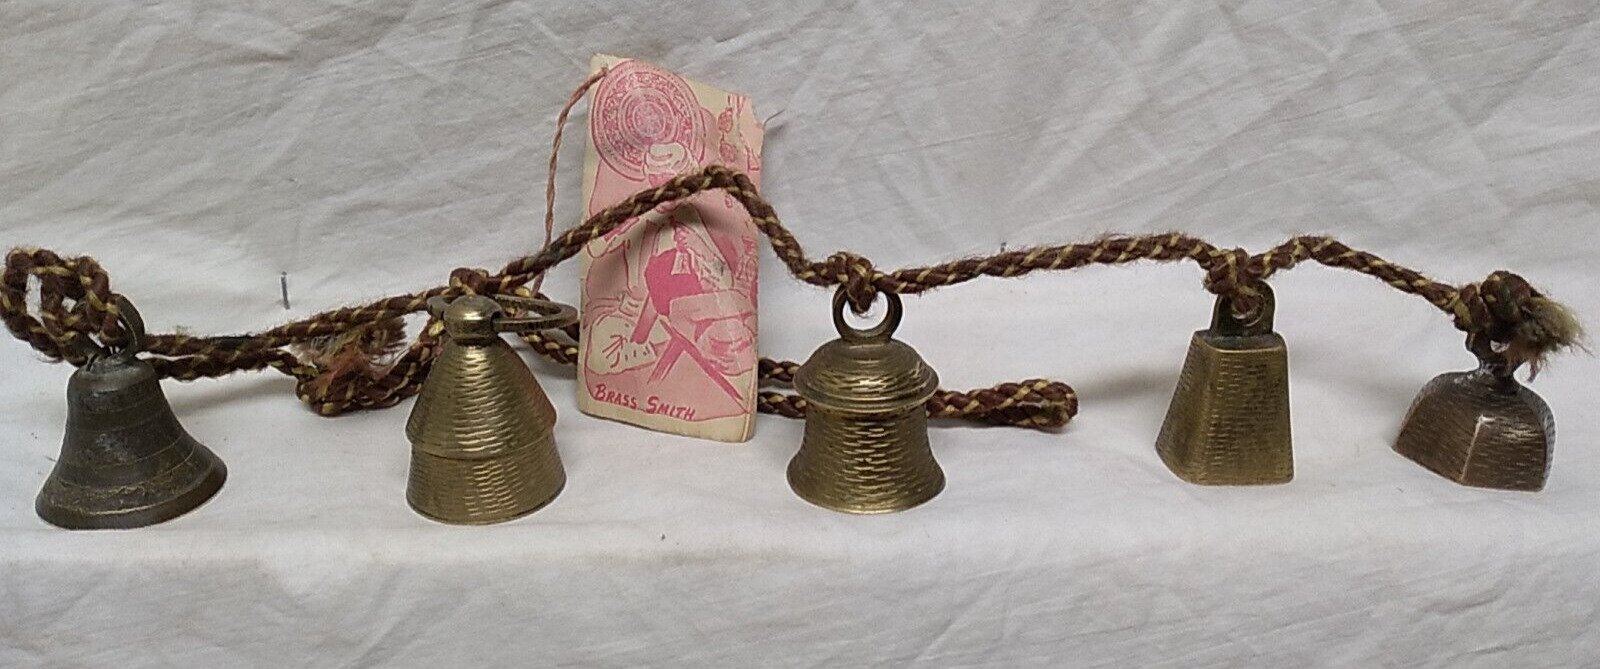 Bells of Sarna 5 different bell shapes & sounds Solid Brass handmade in India